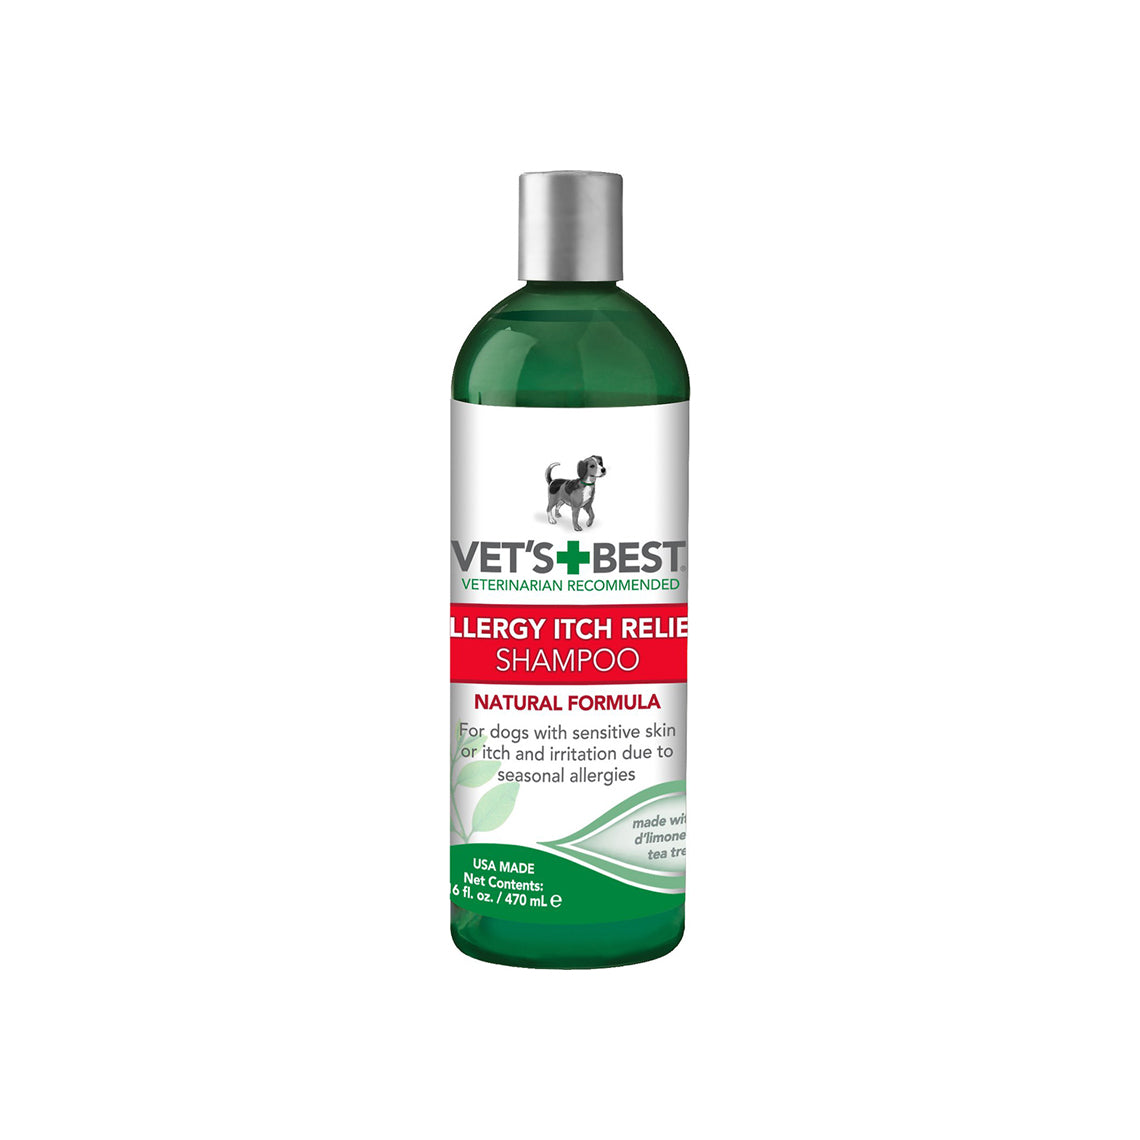 Vet's Best Flea Relief Shampoo for Dogs Only Natural Pet